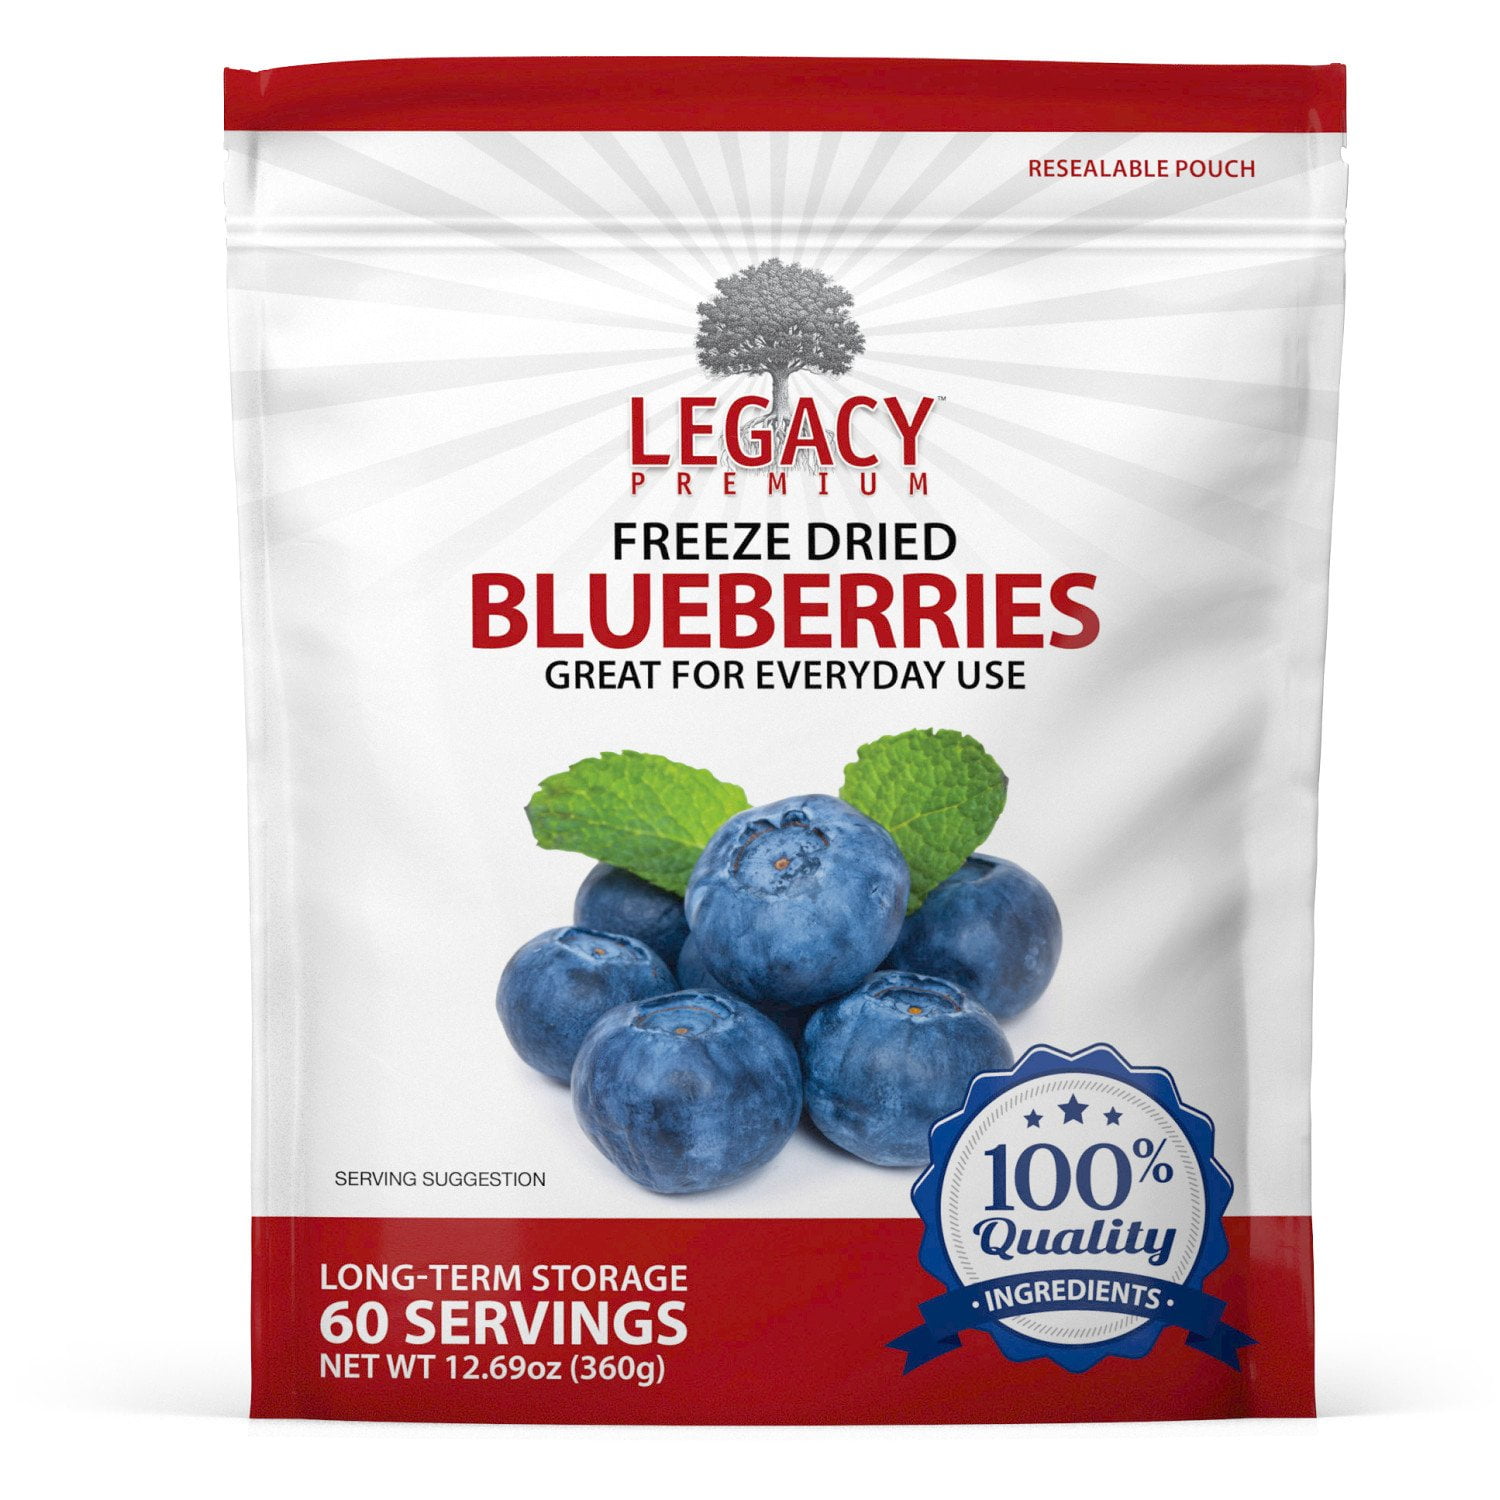 Legacy Premium Freeze Dried Blueberries Pouch Front